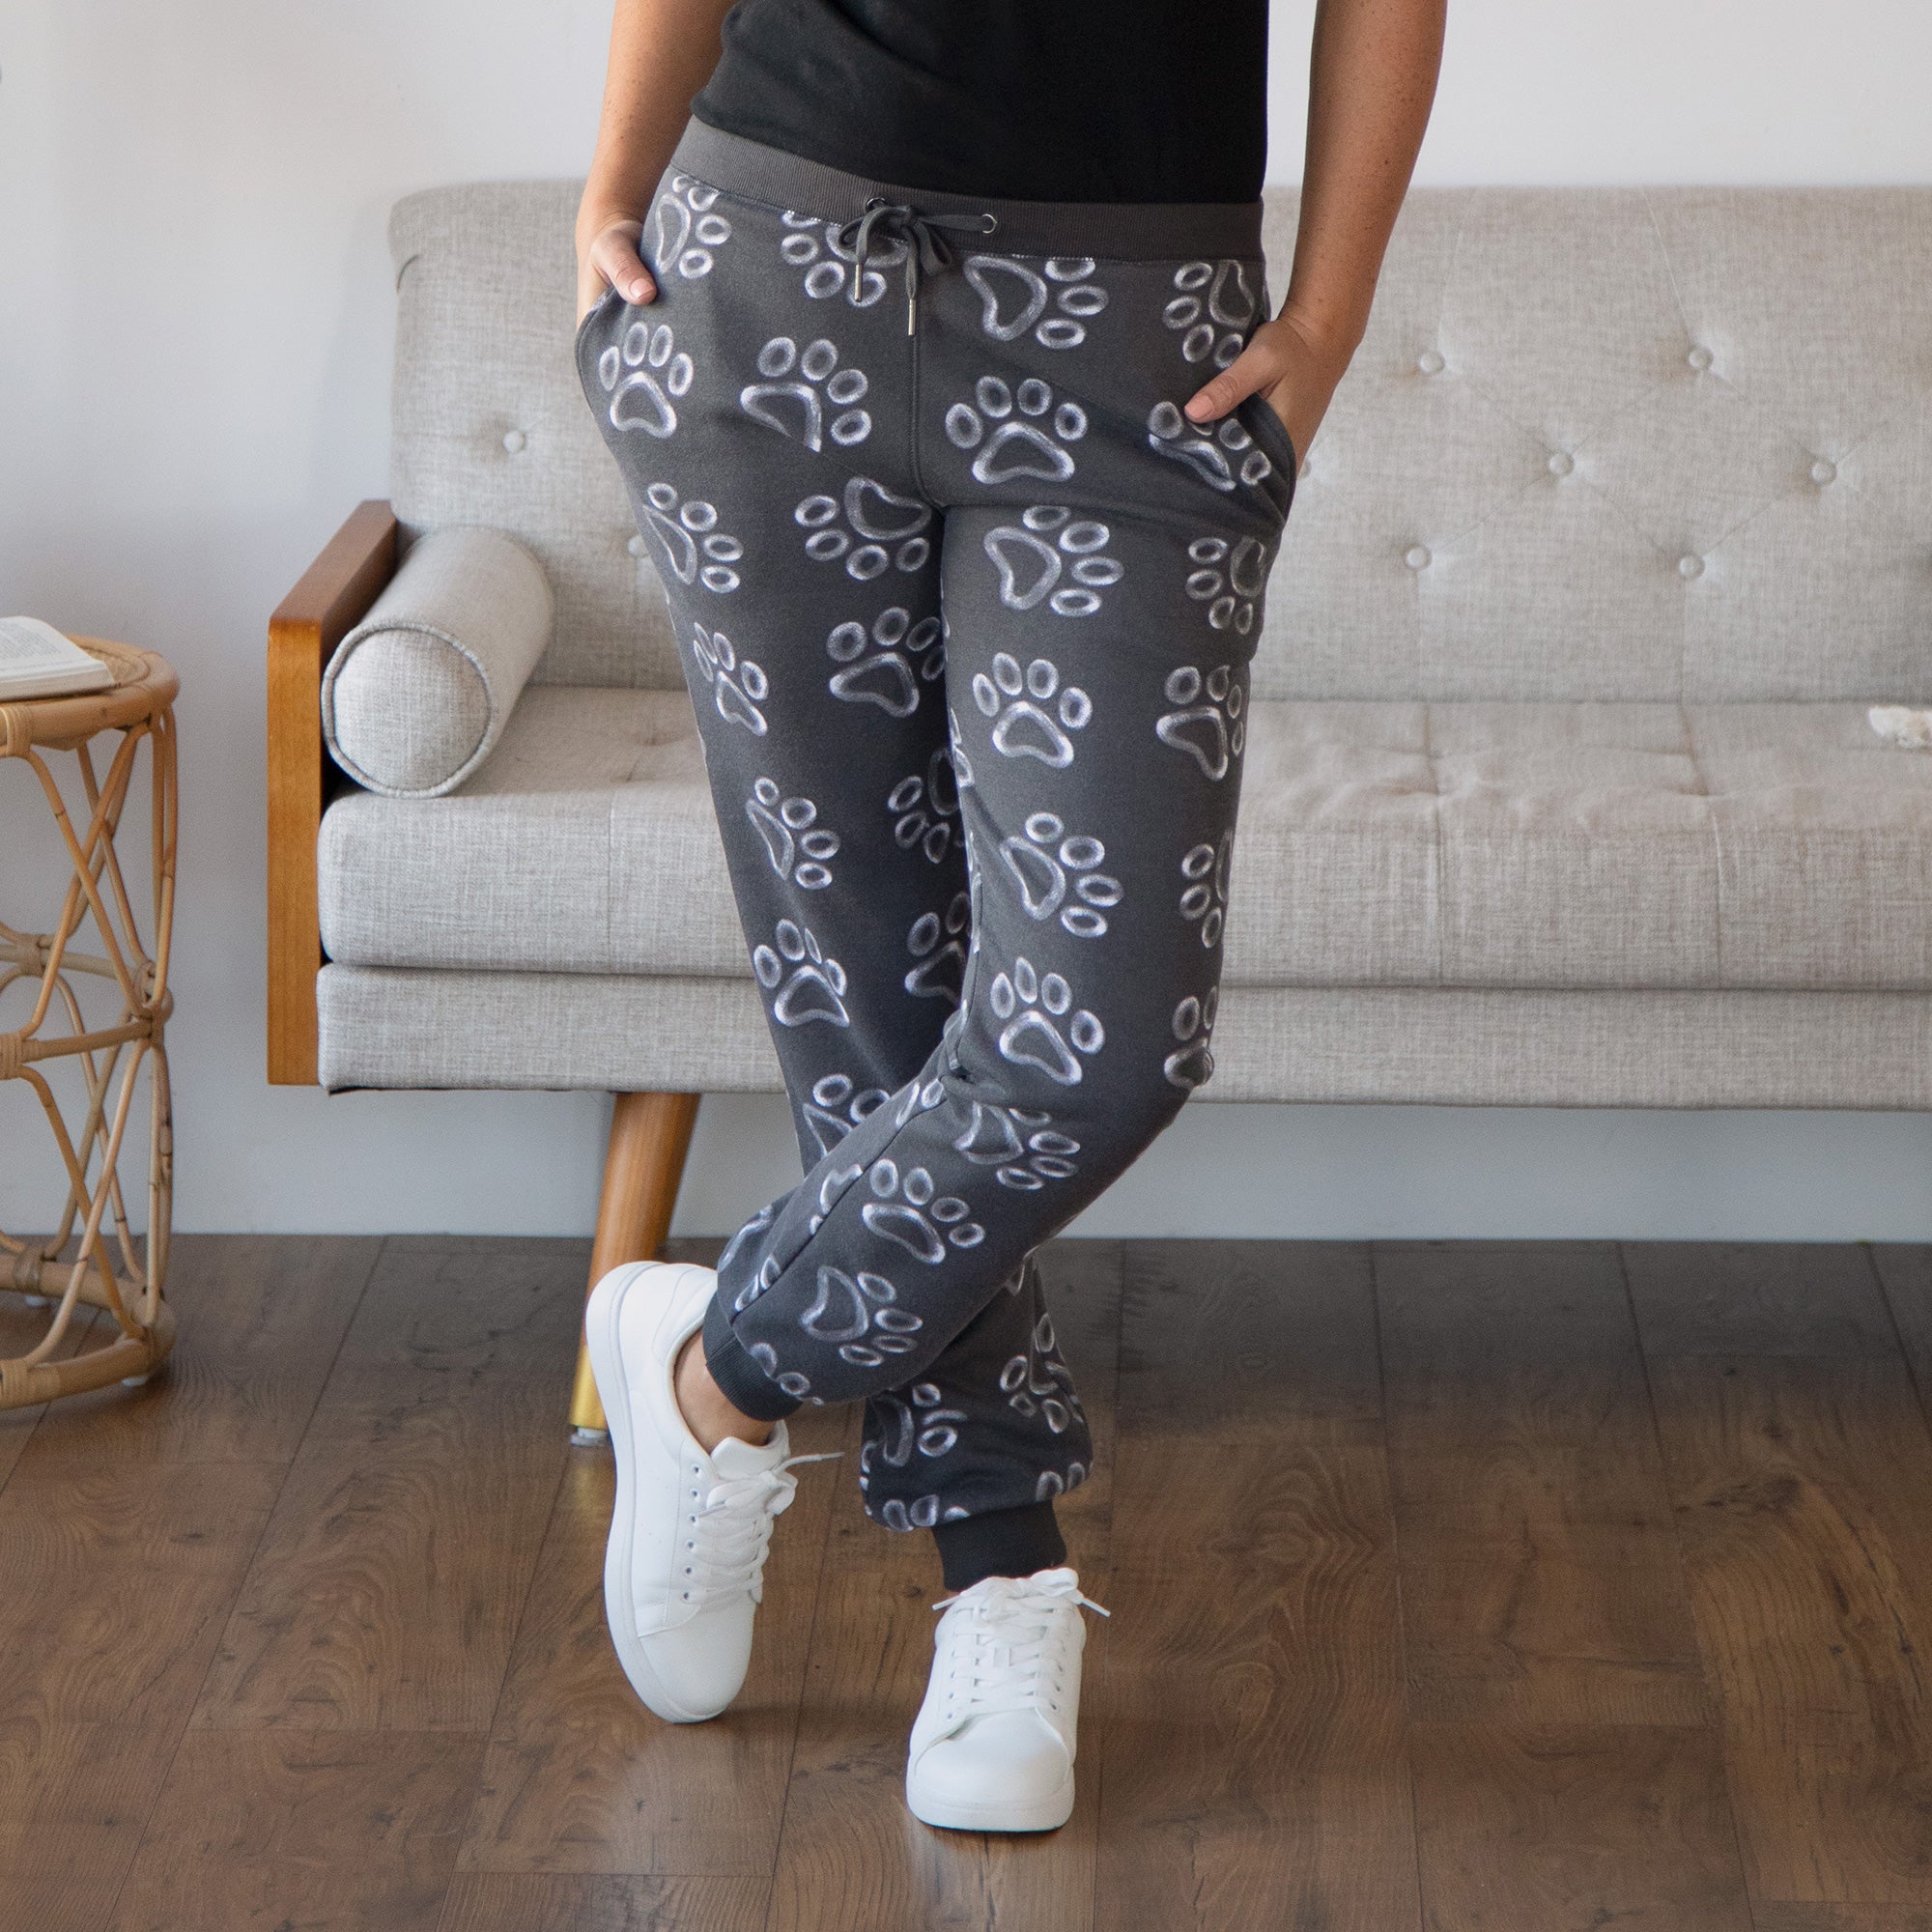 All Over Chalk Paw Sweatpants - XL